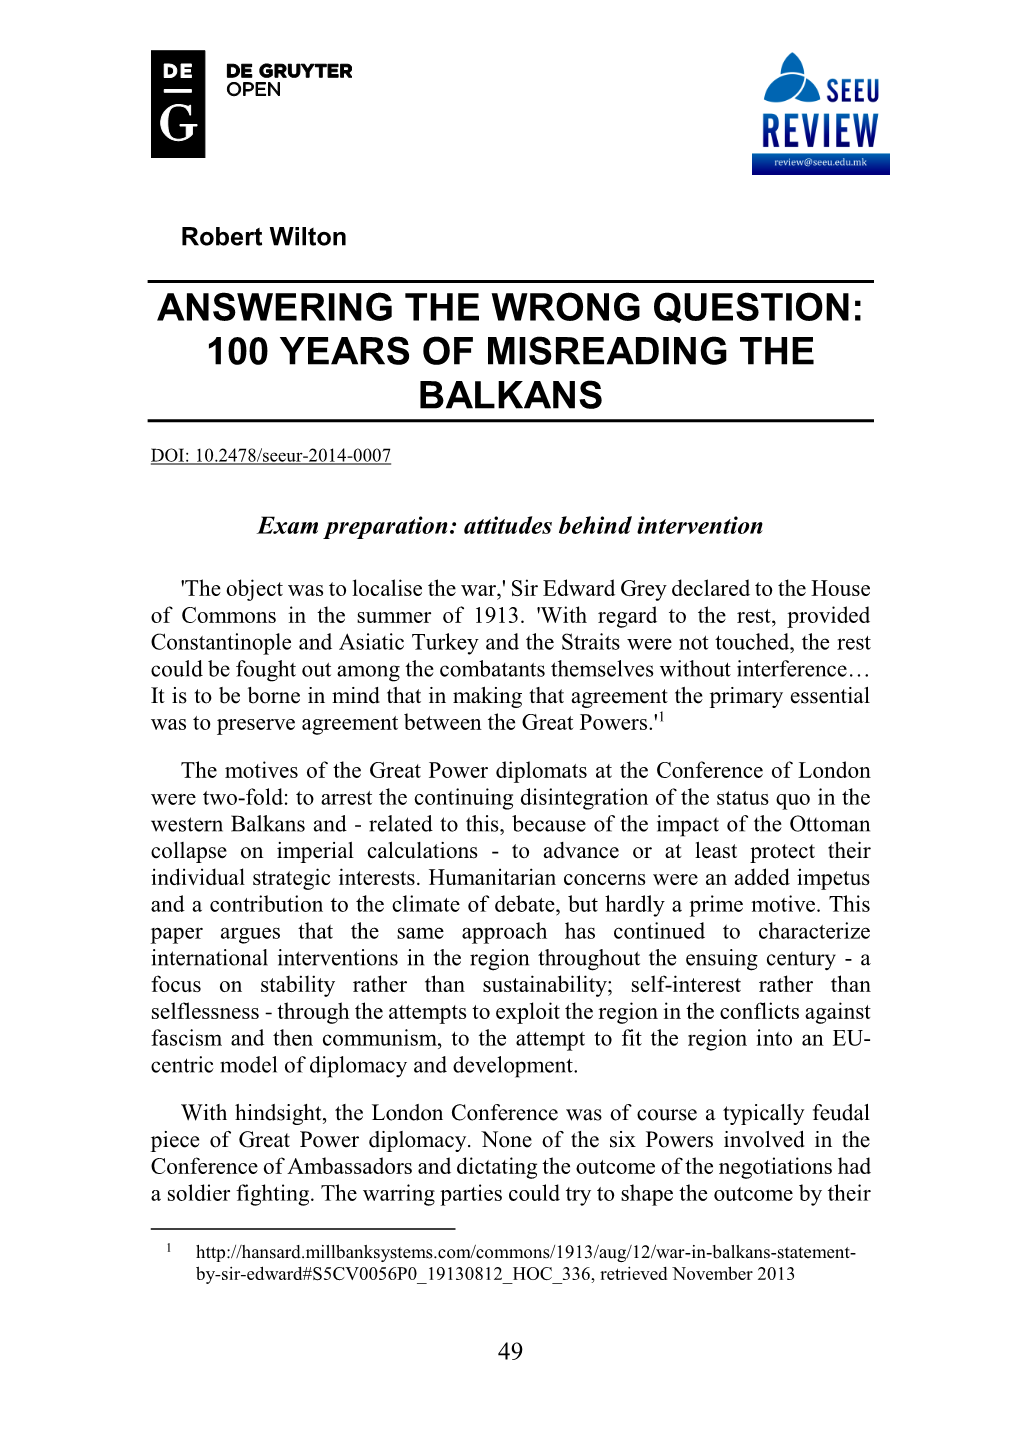 100 Years of Misreading the Balkans